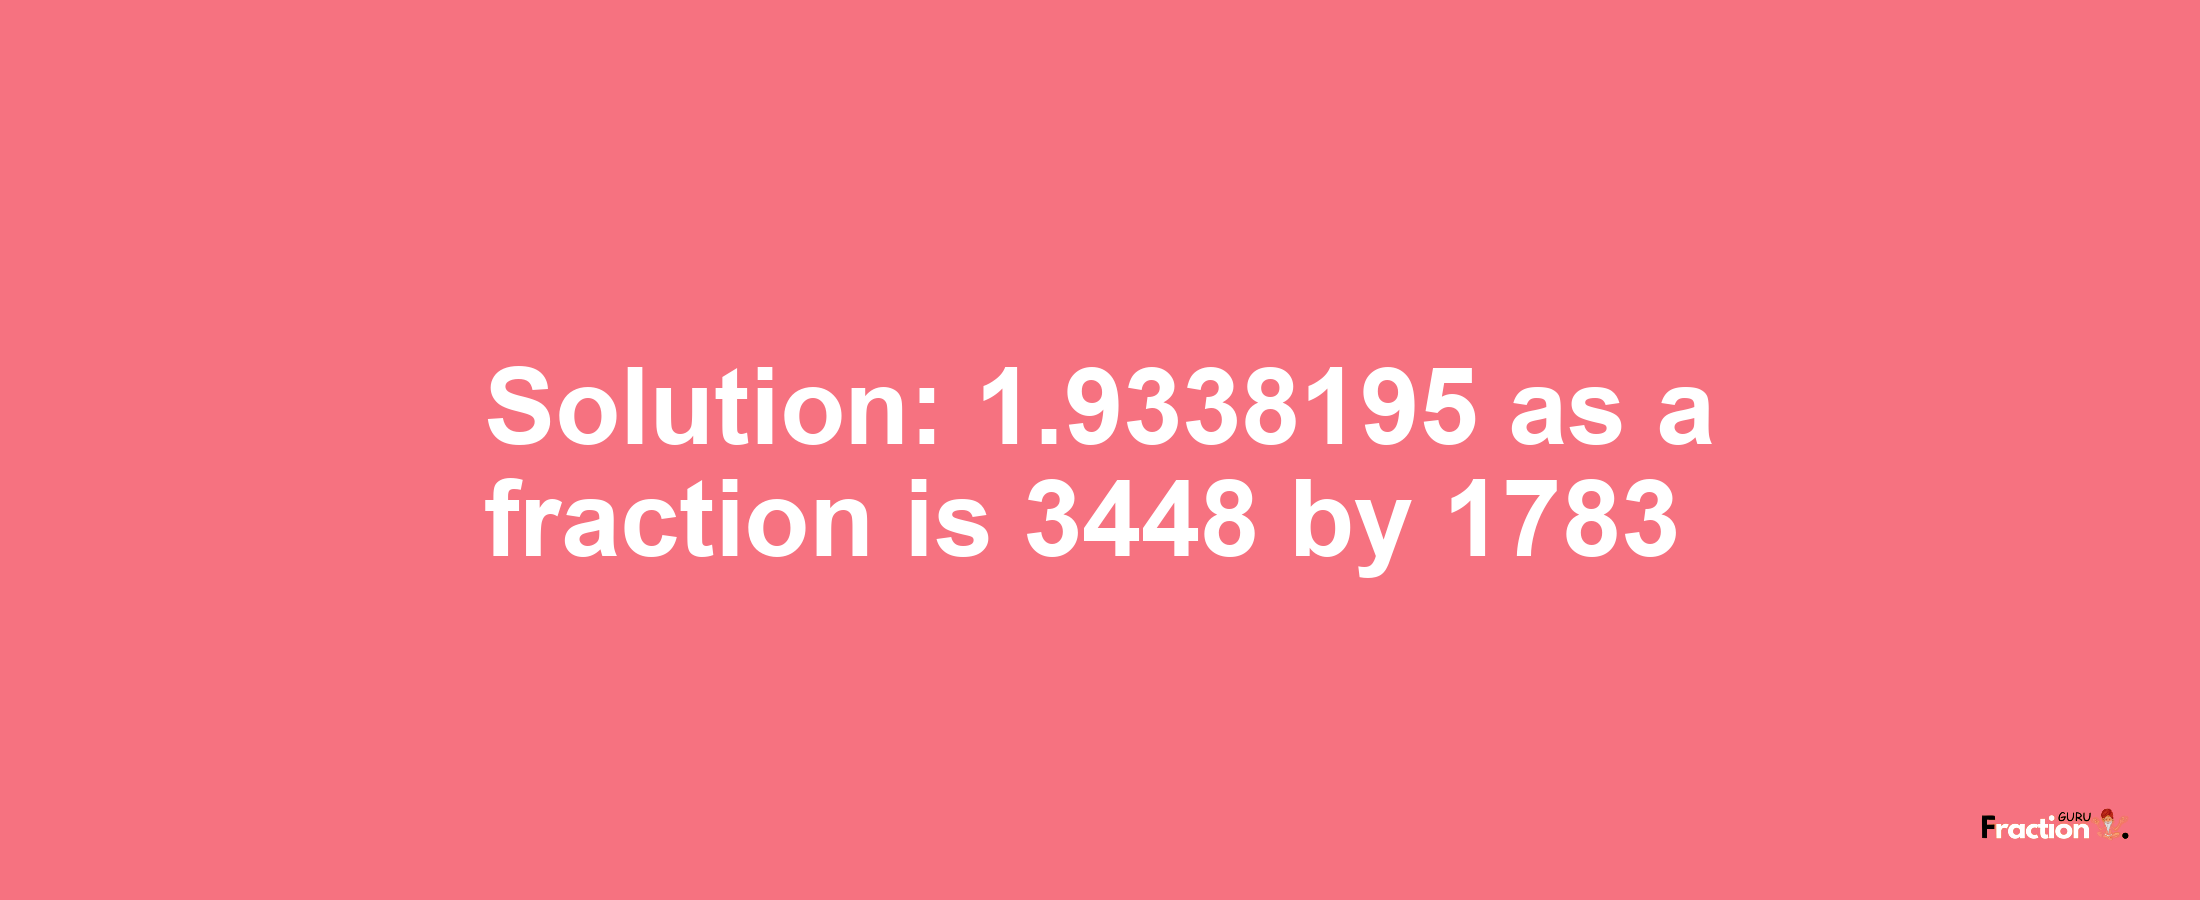 Solution:1.9338195 as a fraction is 3448/1783